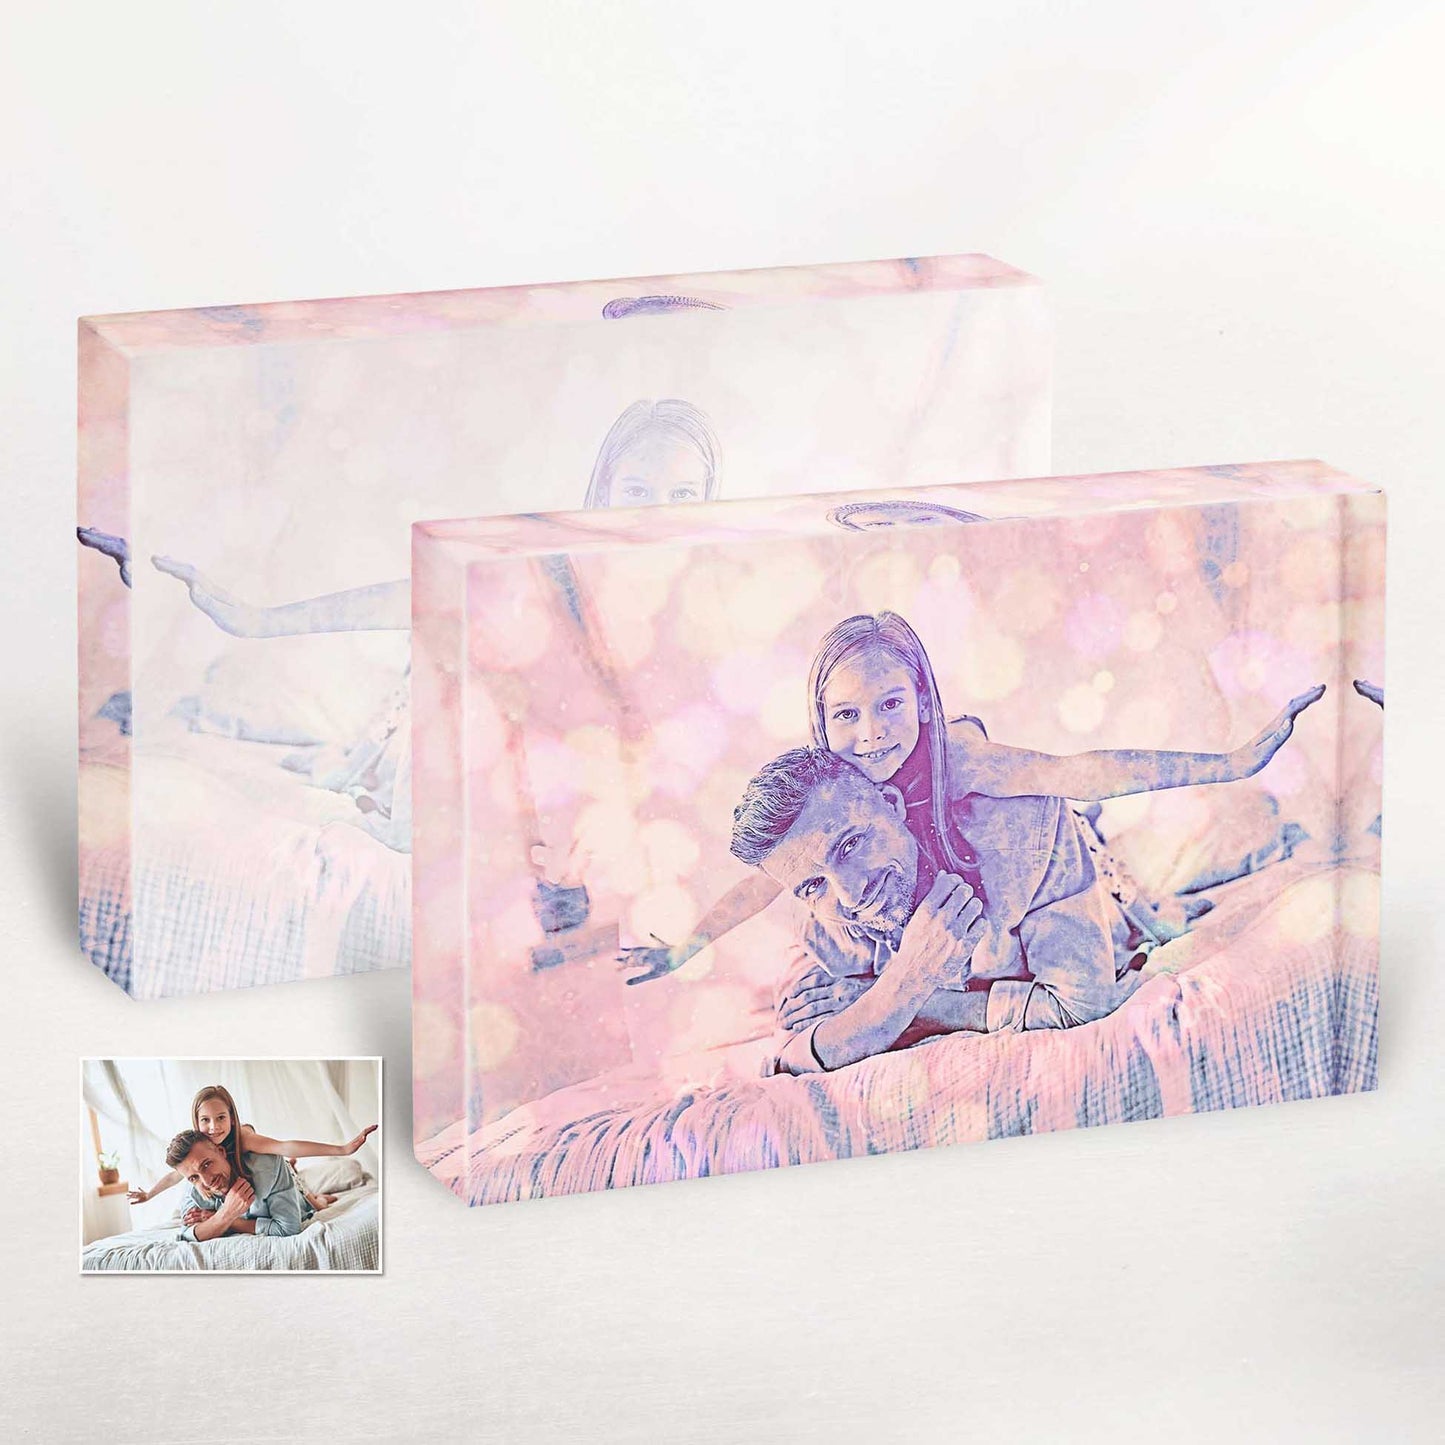 Immerse yourself in the world of cinema with a Personalised Special FX Acrylic Block Photo. The film effect adds a cool and fresh aesthetic, making it a unique and novelty gift.